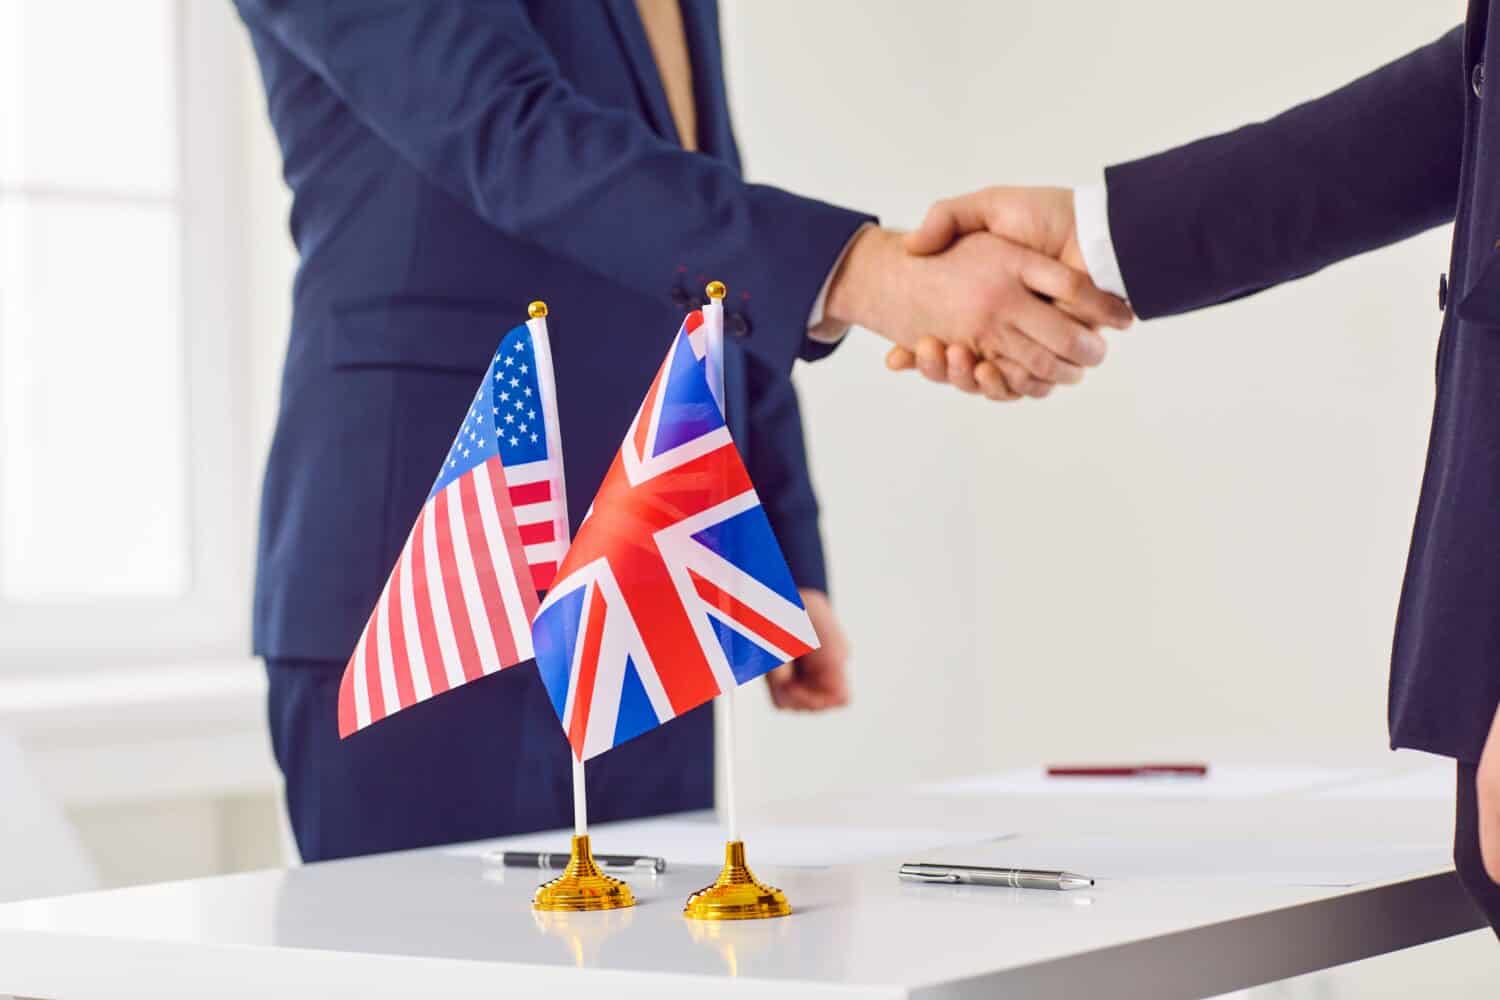 Diplomats from Britain and America meet together in office, reach bilateral trade agreement, sign business contract and exchange handshakes over negotiation table with national flags of USA and UK